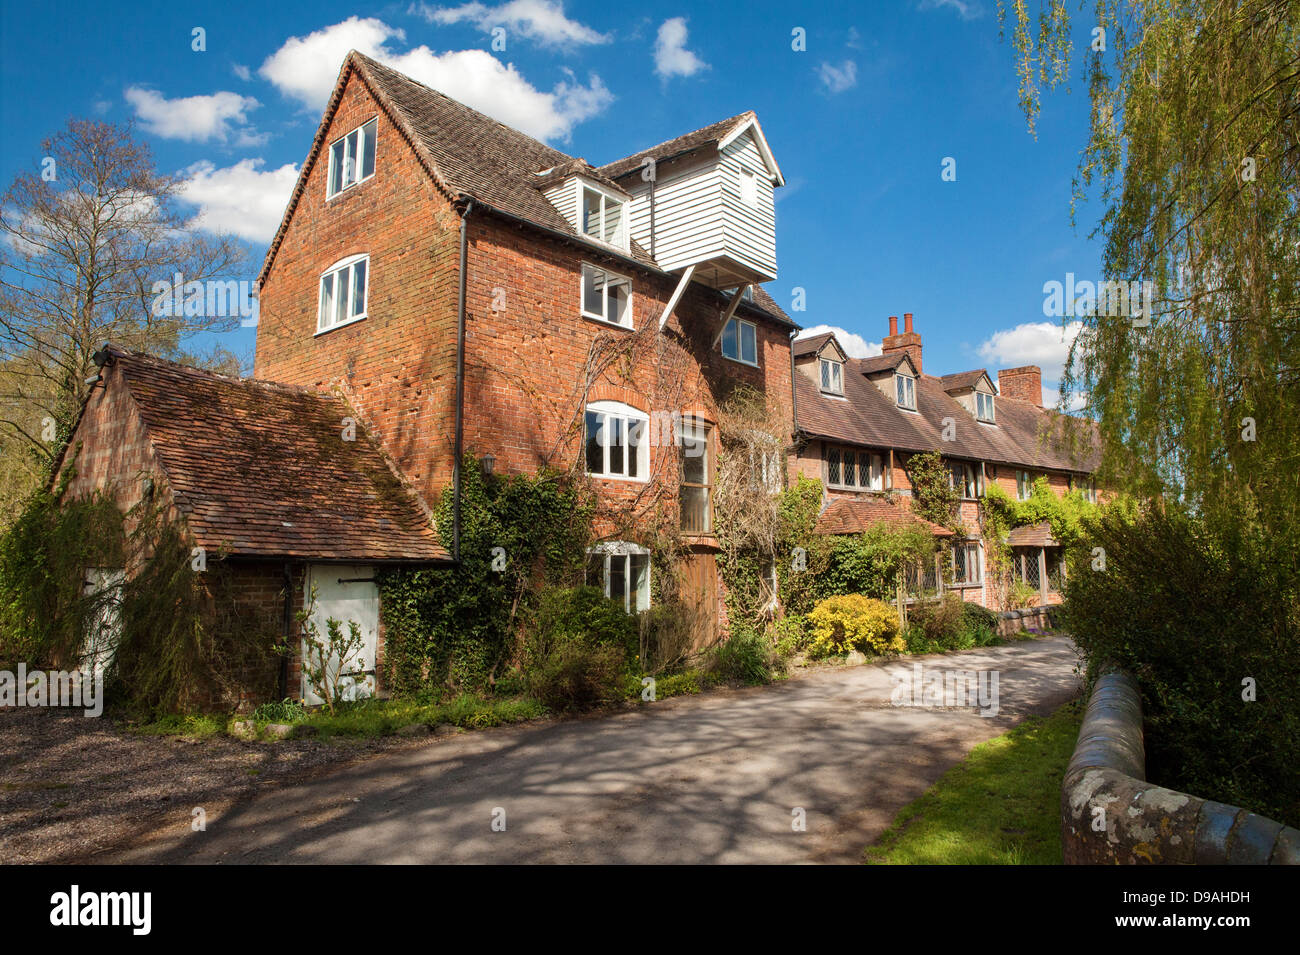 Old mill in a village, England, UK. Stock Photo